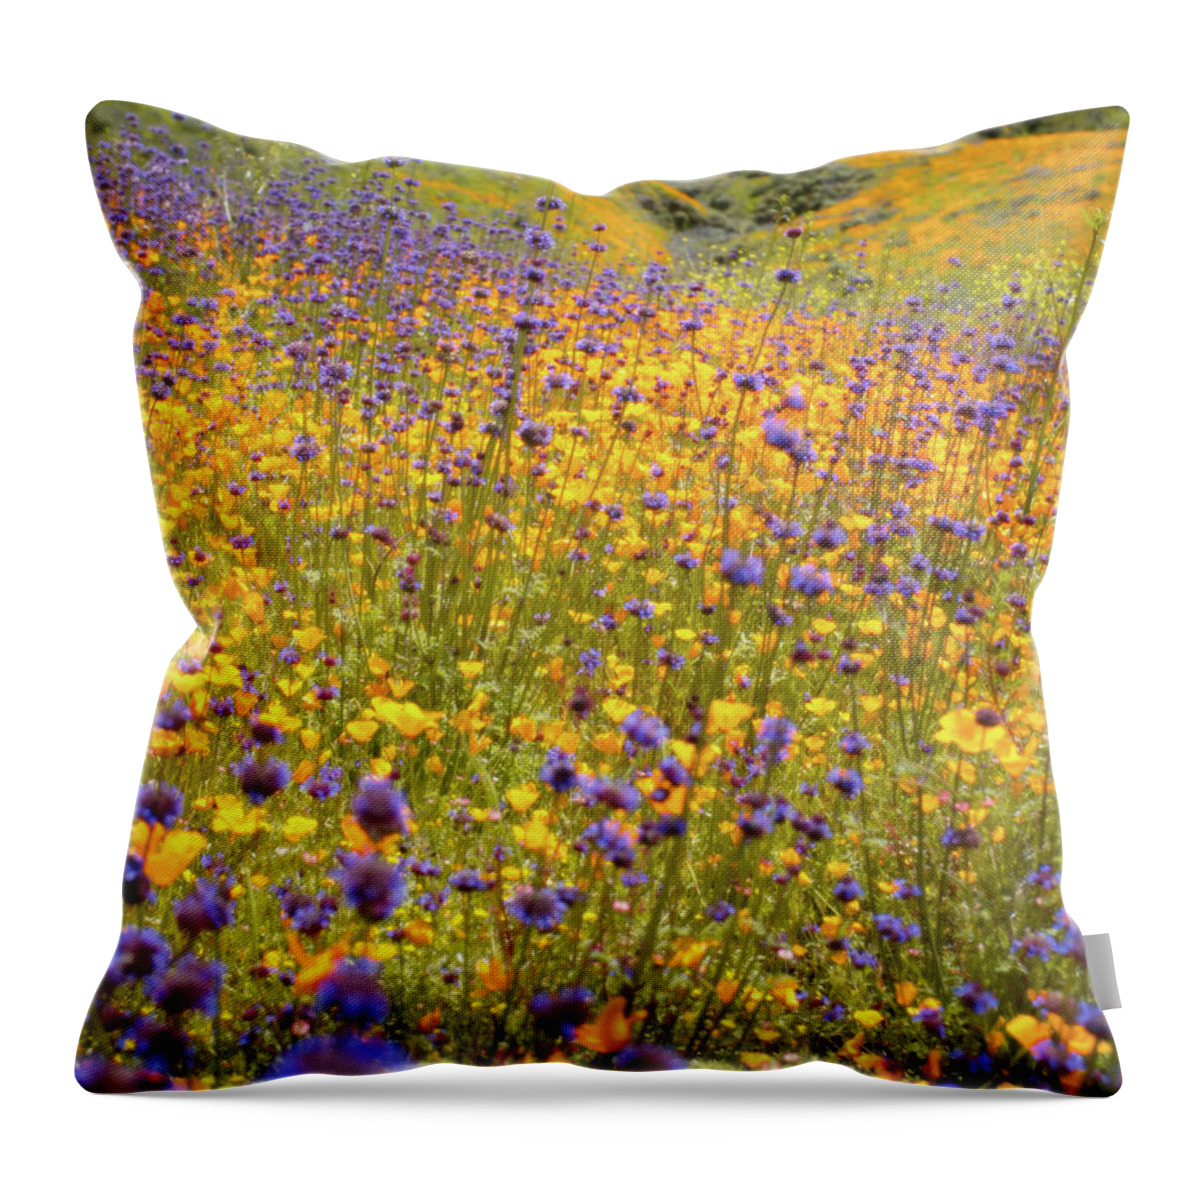 Flowers Throw Pillow featuring the photograph Flora 6 by Ryan Weddle